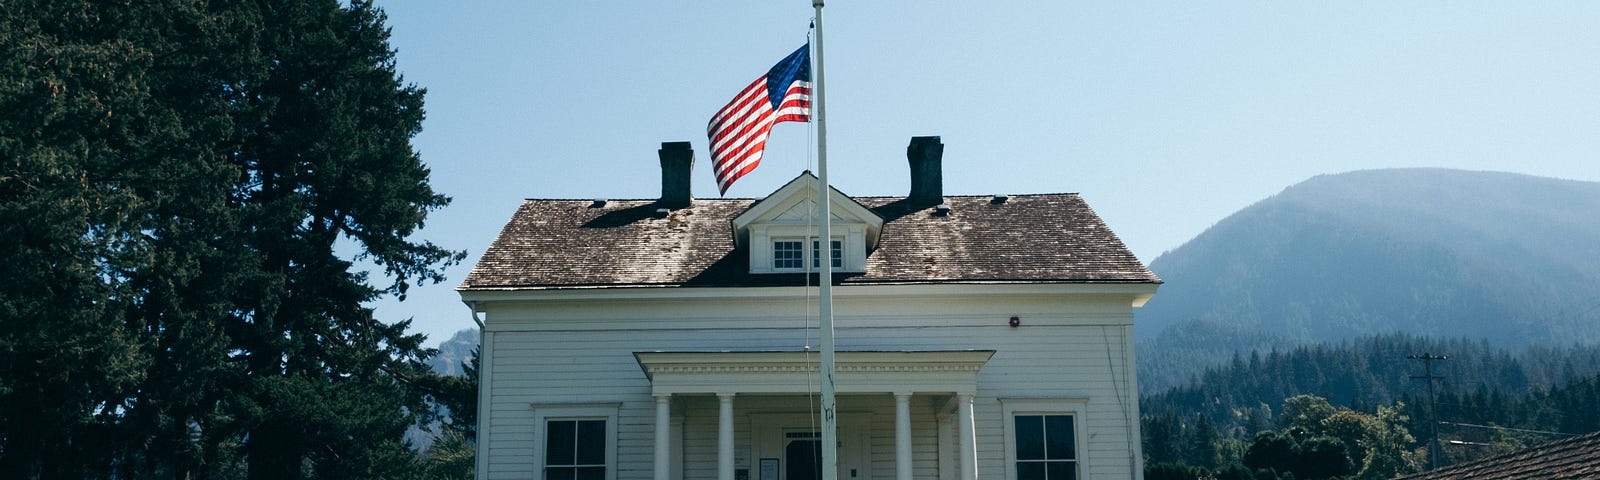 Small white house with American flag in front